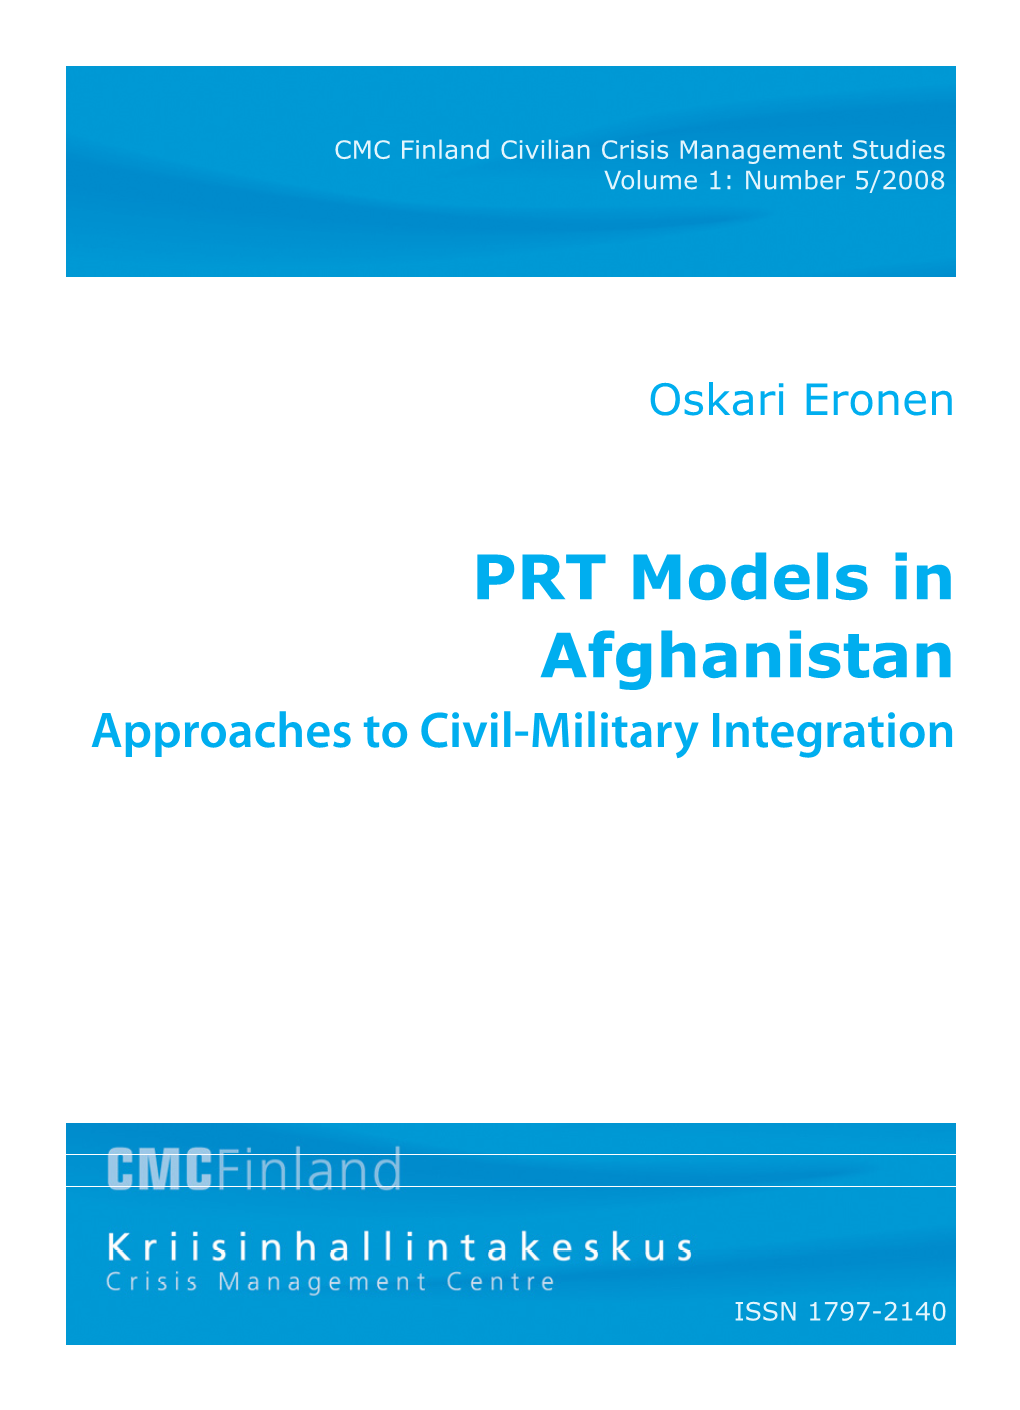 PRT Models in Afghanistan: Approaches to Civil-Military